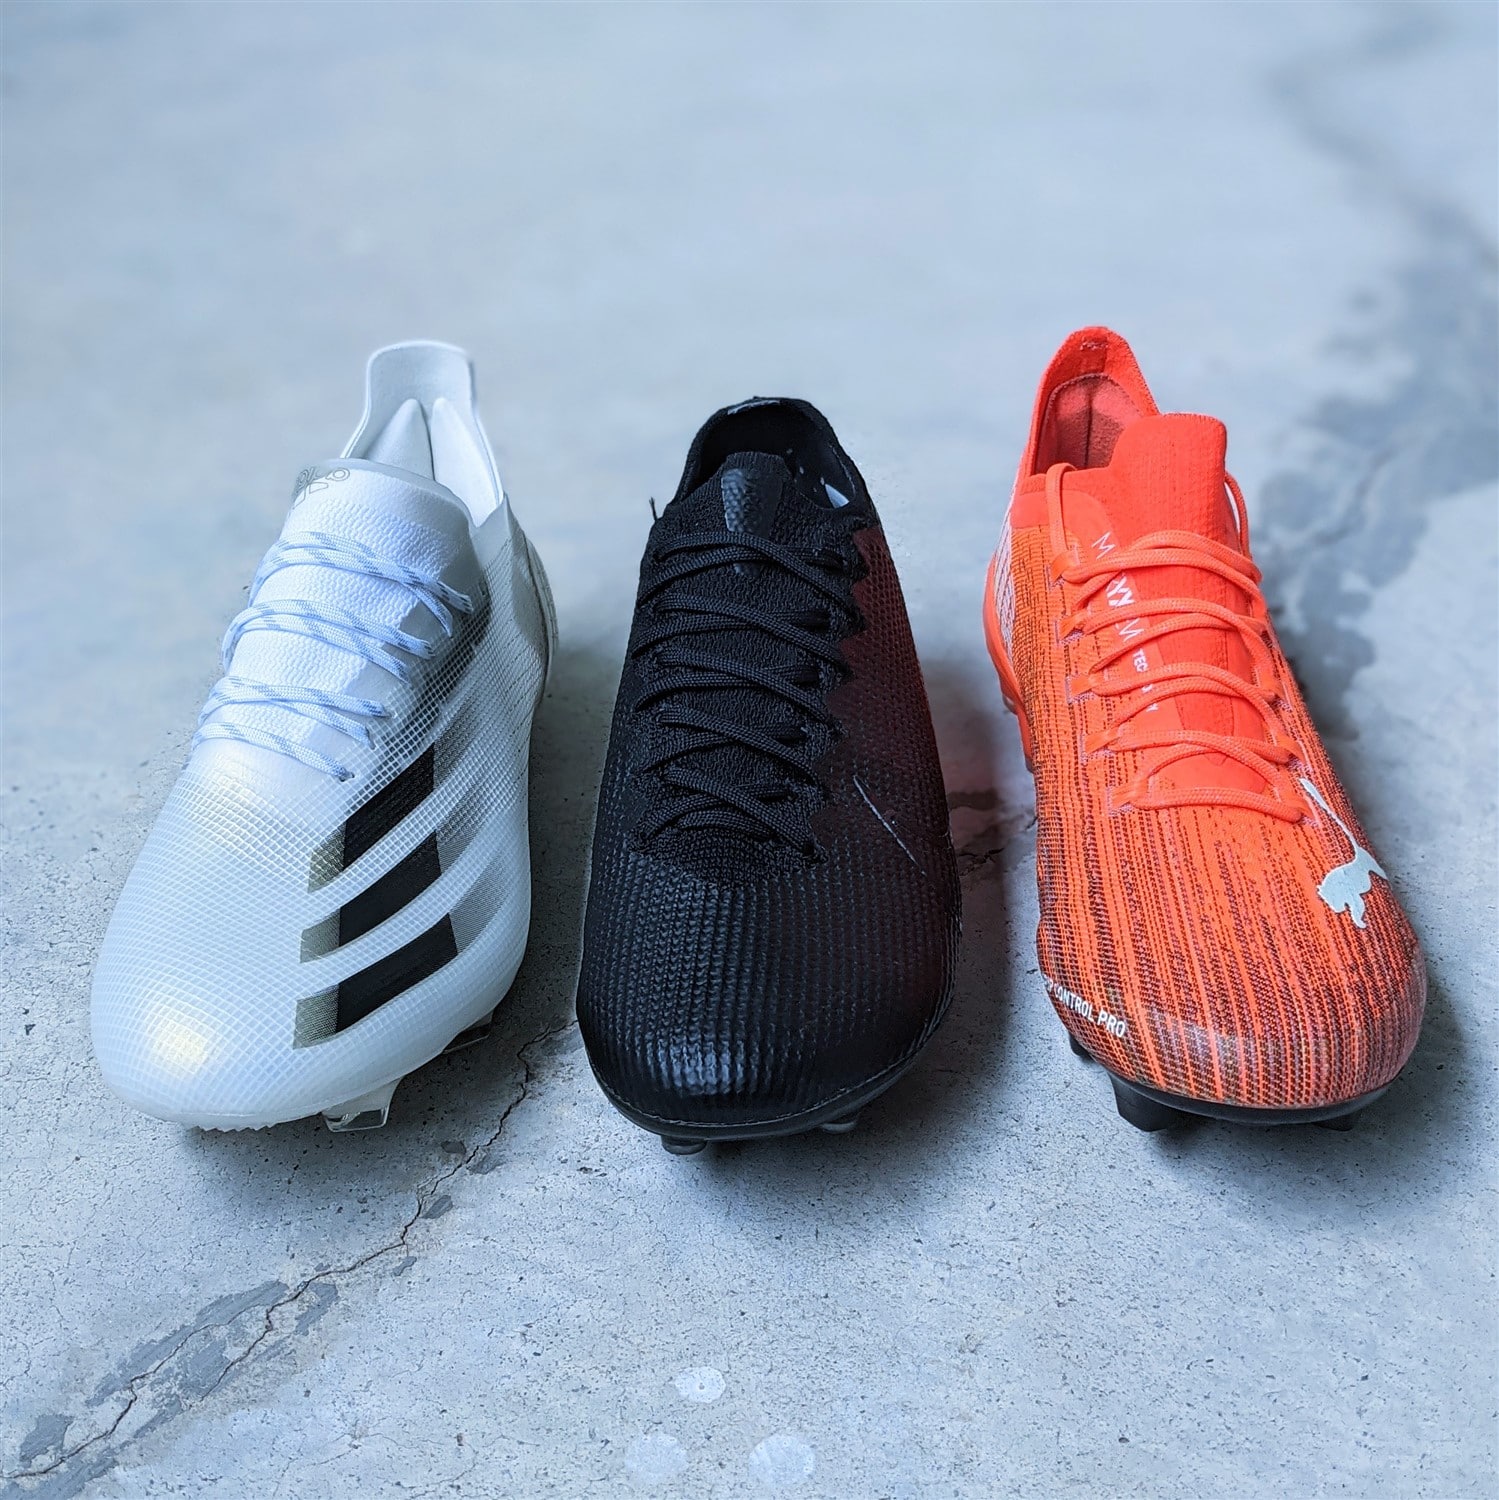 Speed Boot Battle - Mercurial Vapor v adidas X Ghosted v Puma Ultra - football boots soccer cleats (3)